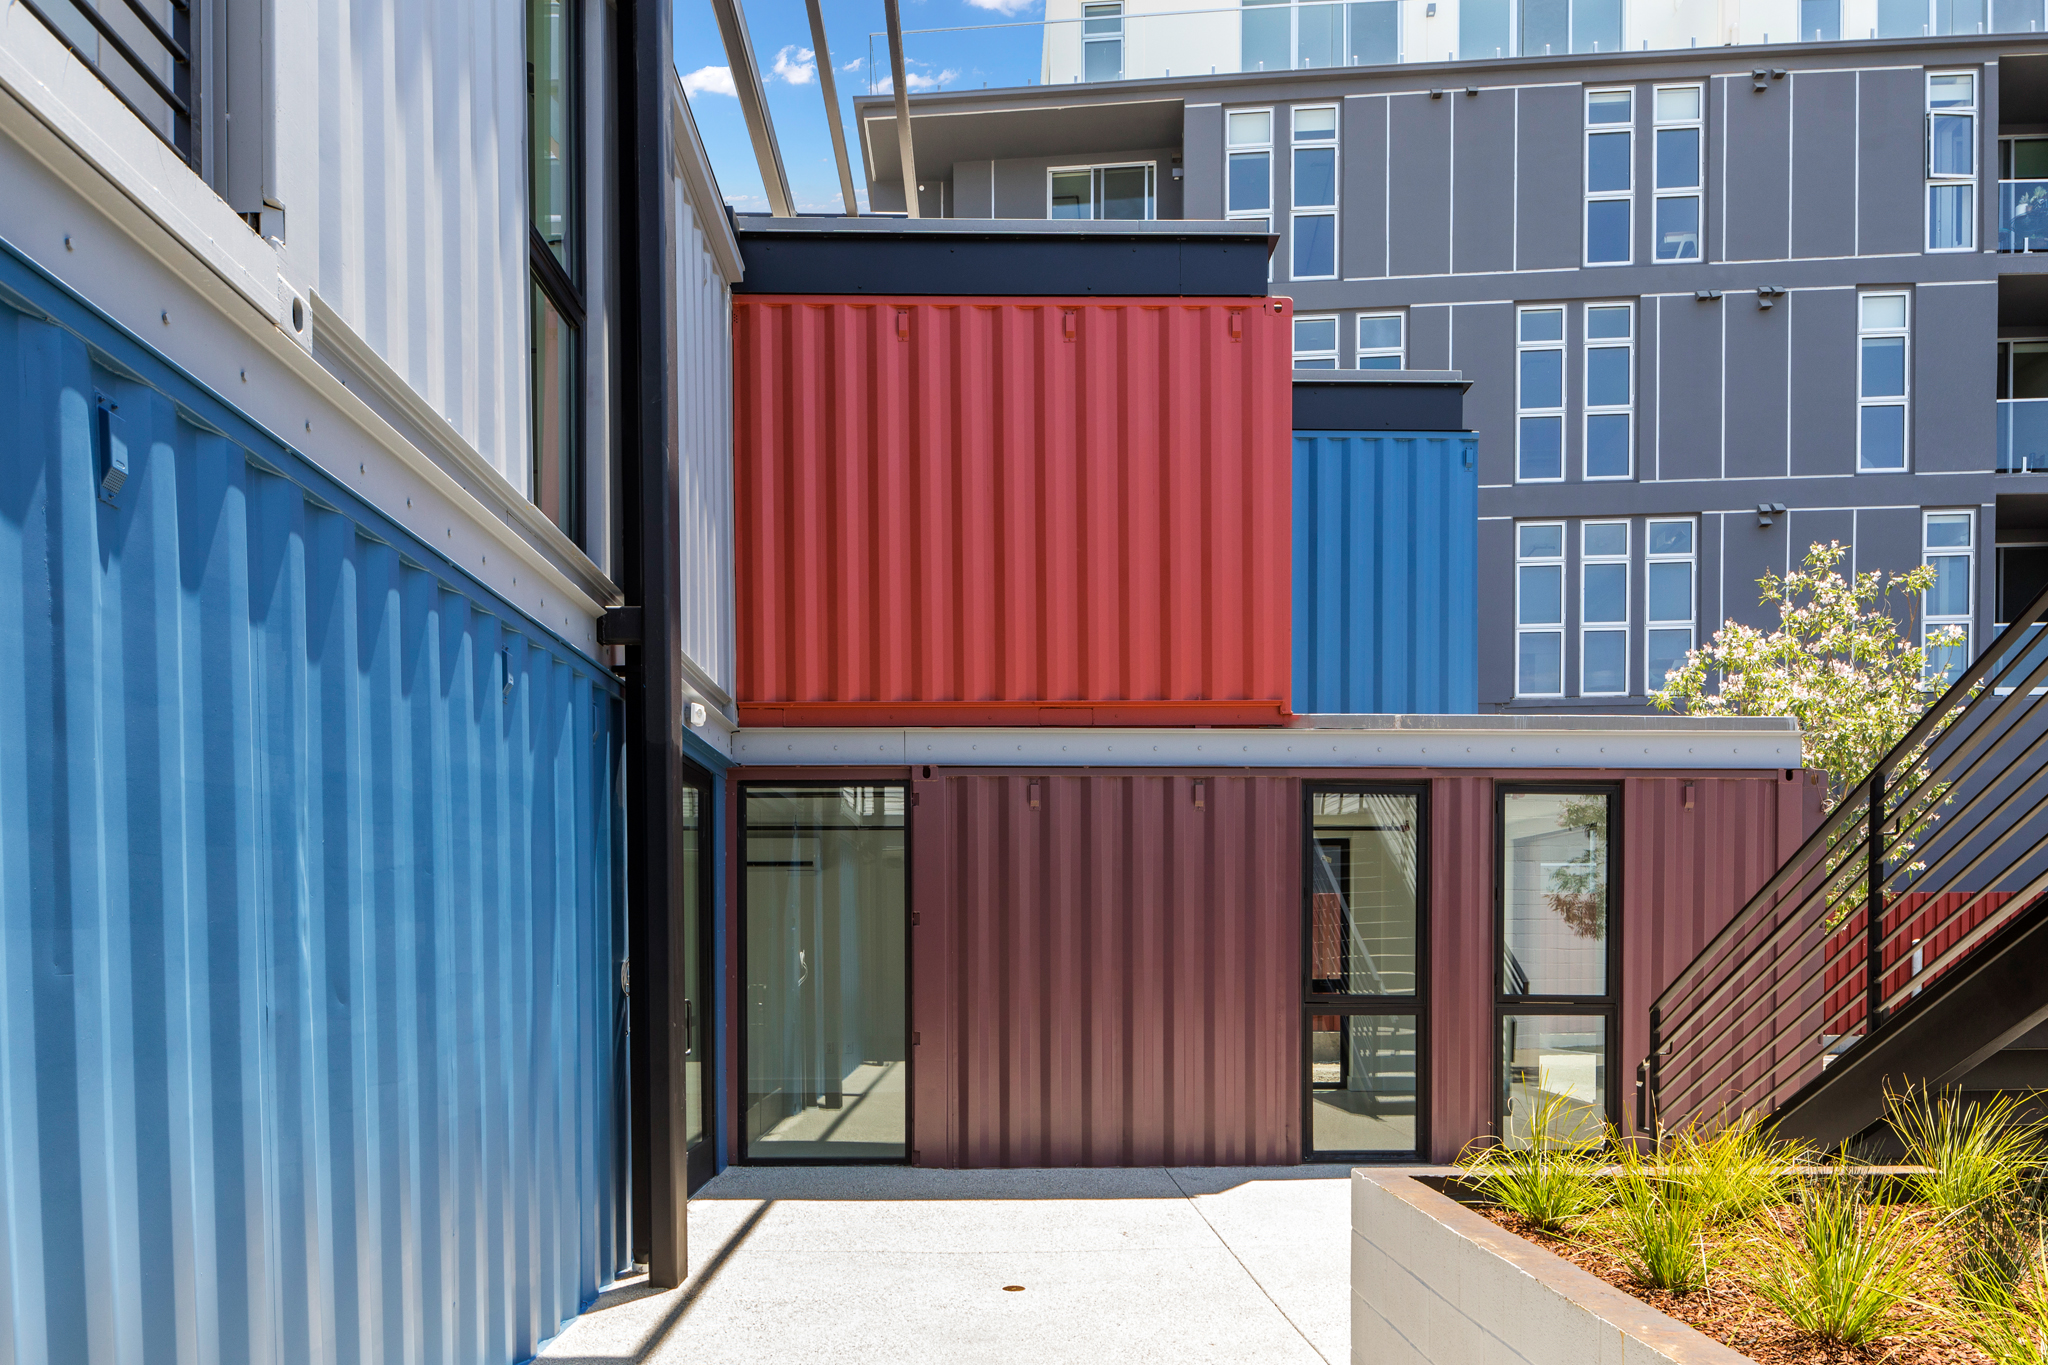 The Container & Art_108